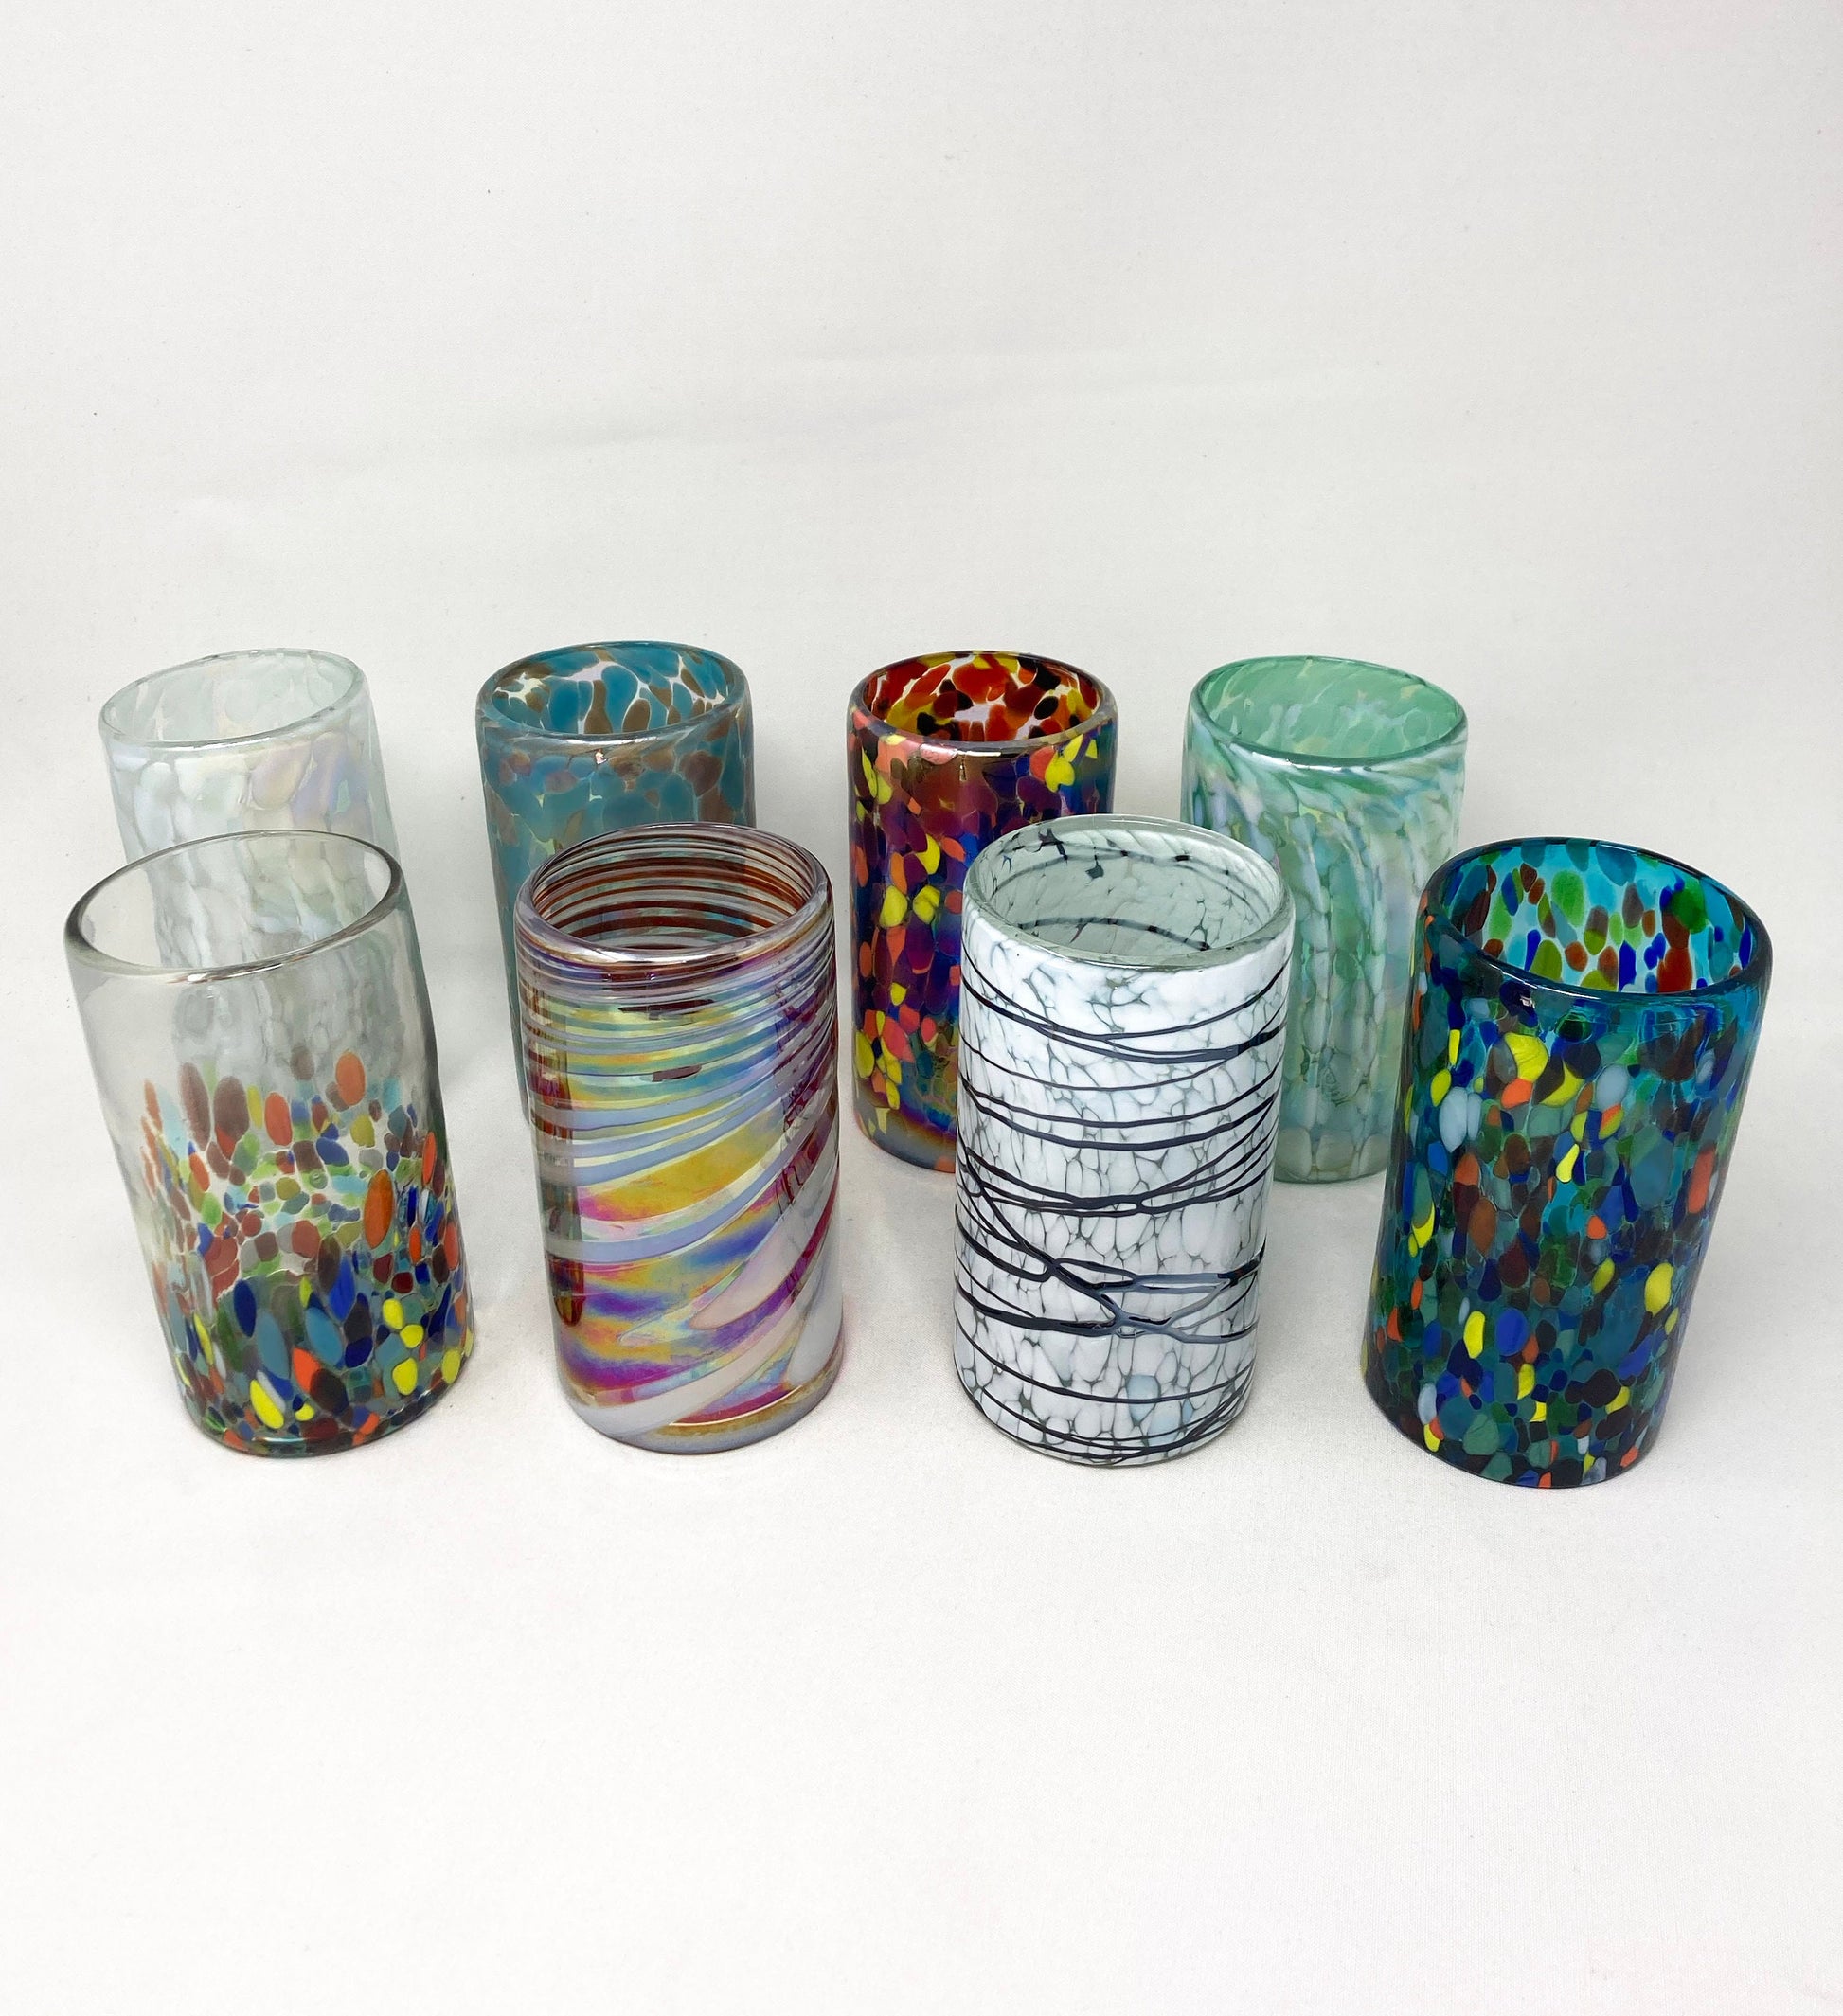 12 Assorted Glasses (only 8 shown in photo) - Blue Dorado Designs